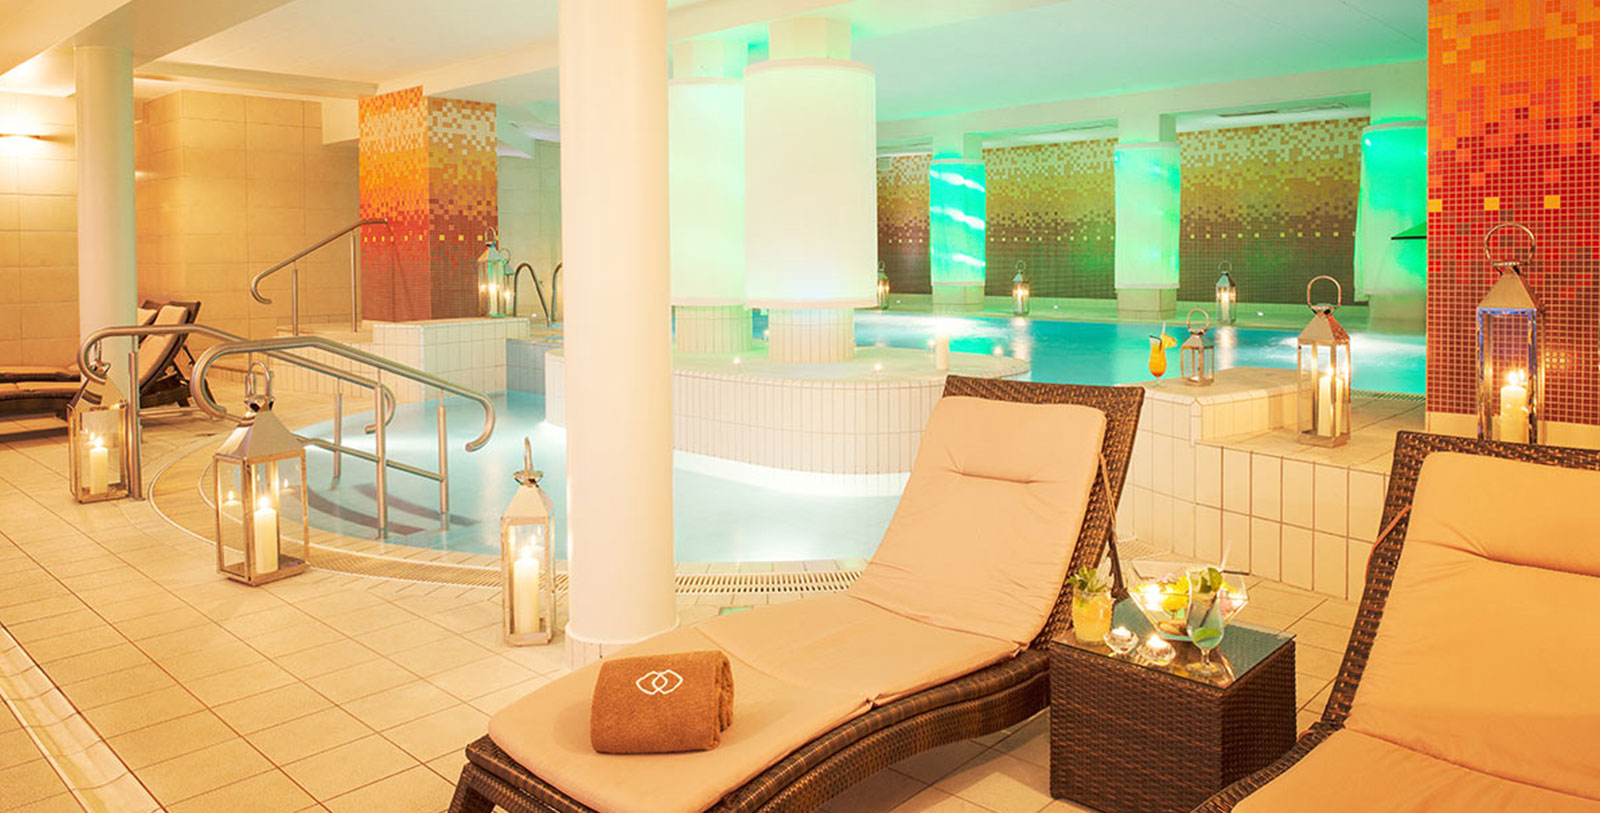 Experience a rejuvenating day of relaxation at the Grand SPA.